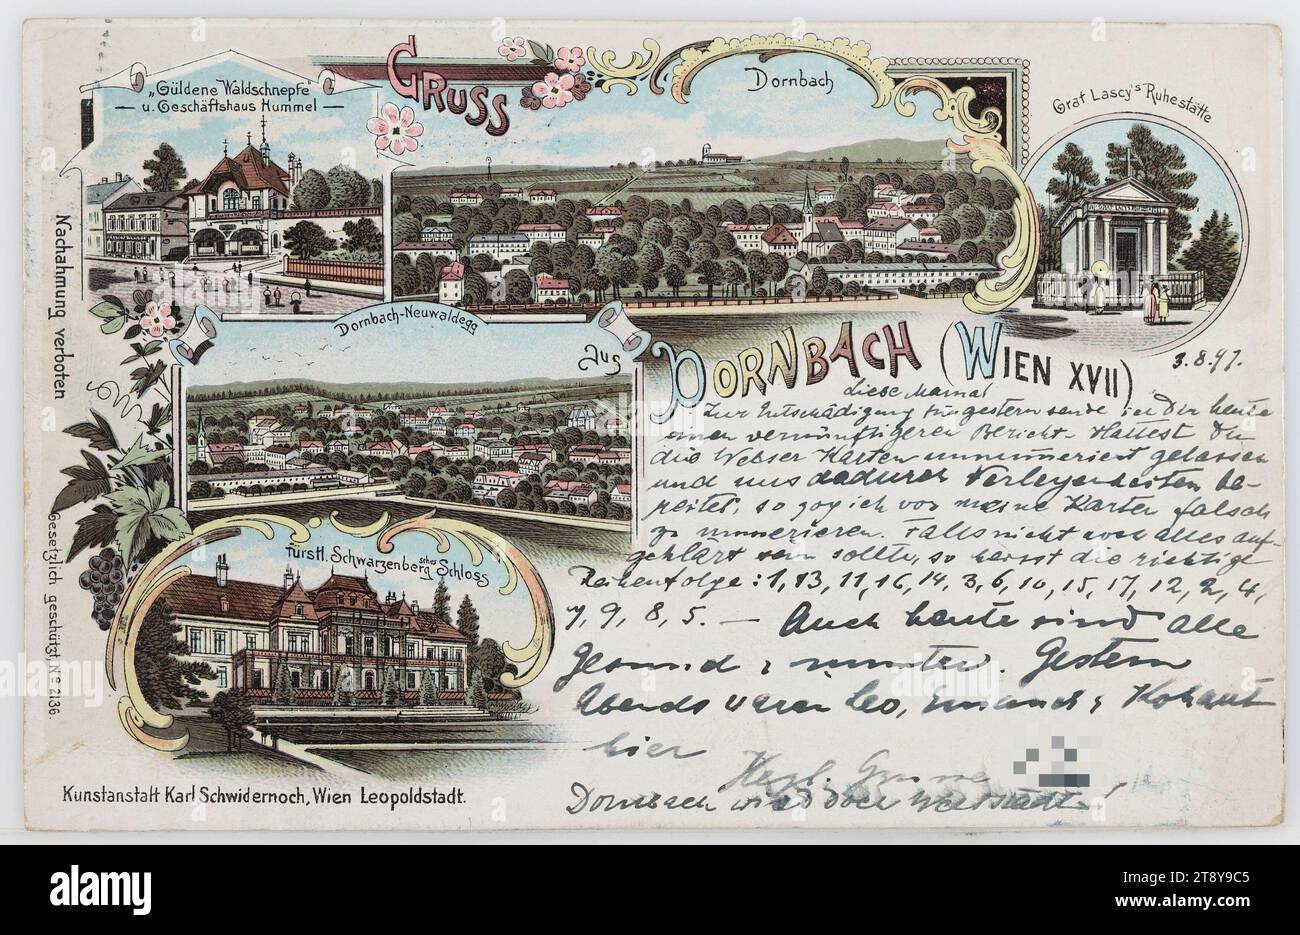 17th, Dornbach - panorama of Dornbach and Neuwaldegg, restaurant 'Zur goldenen Waldschnepfe', Schwarzenberg Castle and grave of Count Lascy, picture postcard, Karl Schwidernoch, manufacturer, 1897, coated cardboard, color lithograph, inscription, FROM, Vienna, TO, Peuerbach bei Neumarkt-Kaltern, ADDRESS, Peuerbach bei Neumarkt-Kaltern Upper Austria, MESSAGE, 3.8.97, Dear Mom! To compensate you for yesterday, I am sending you a sensible report today. While you had left the Welser cards unnumbered and thus caused us embarrassment Stock Photo